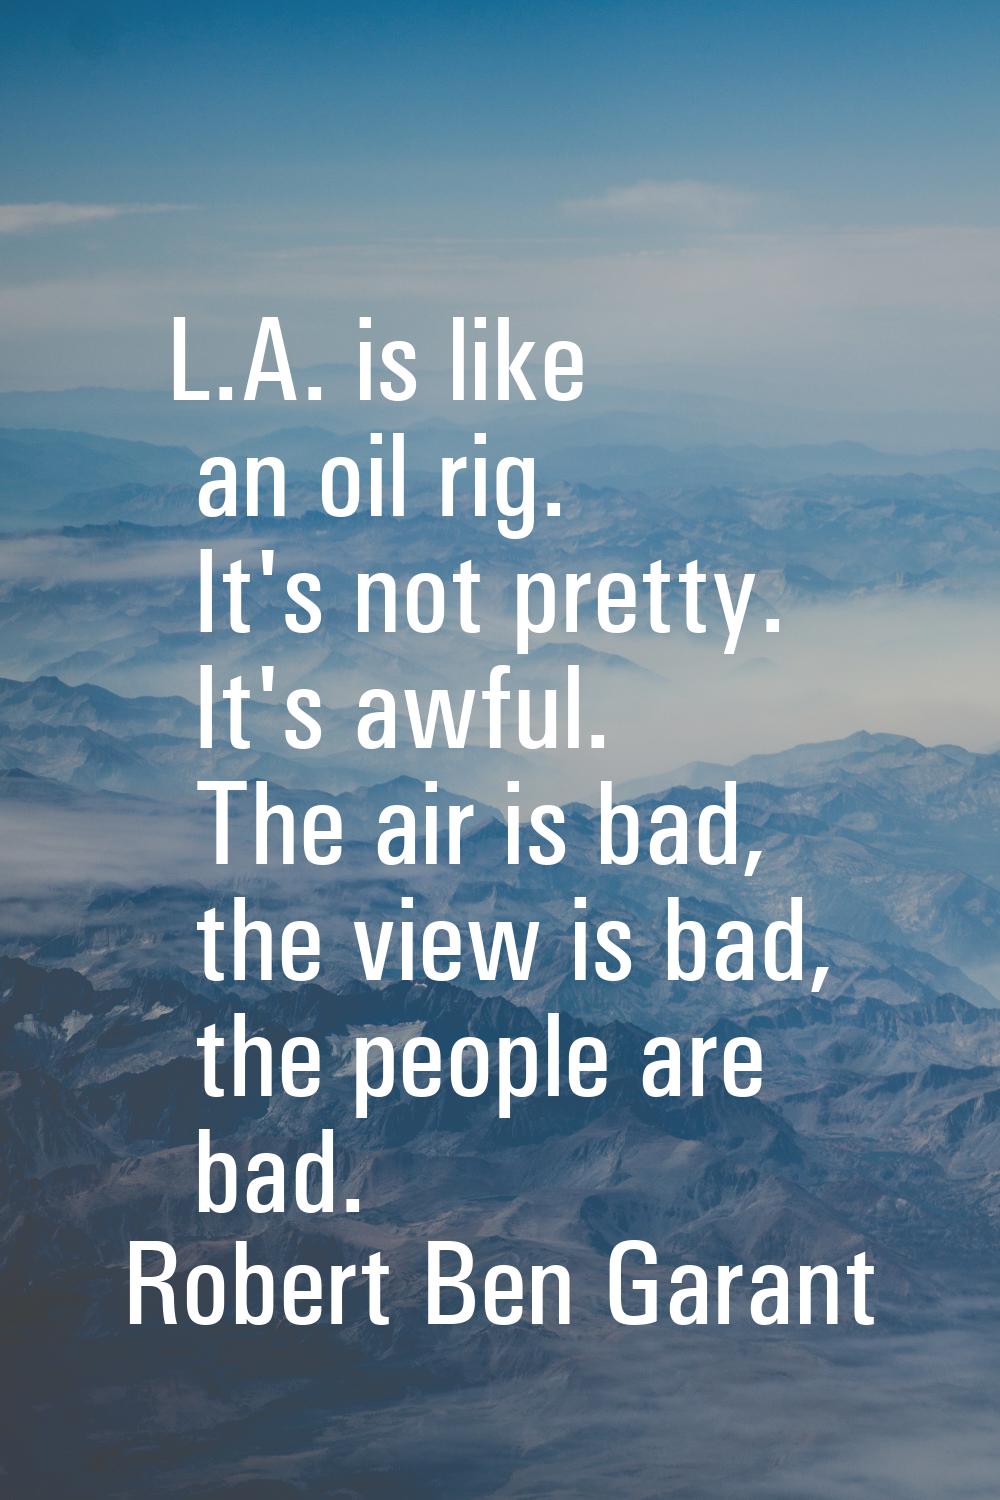 L.A. is like an oil rig. It's not pretty. It's awful. The air is bad, the view is bad, the people a